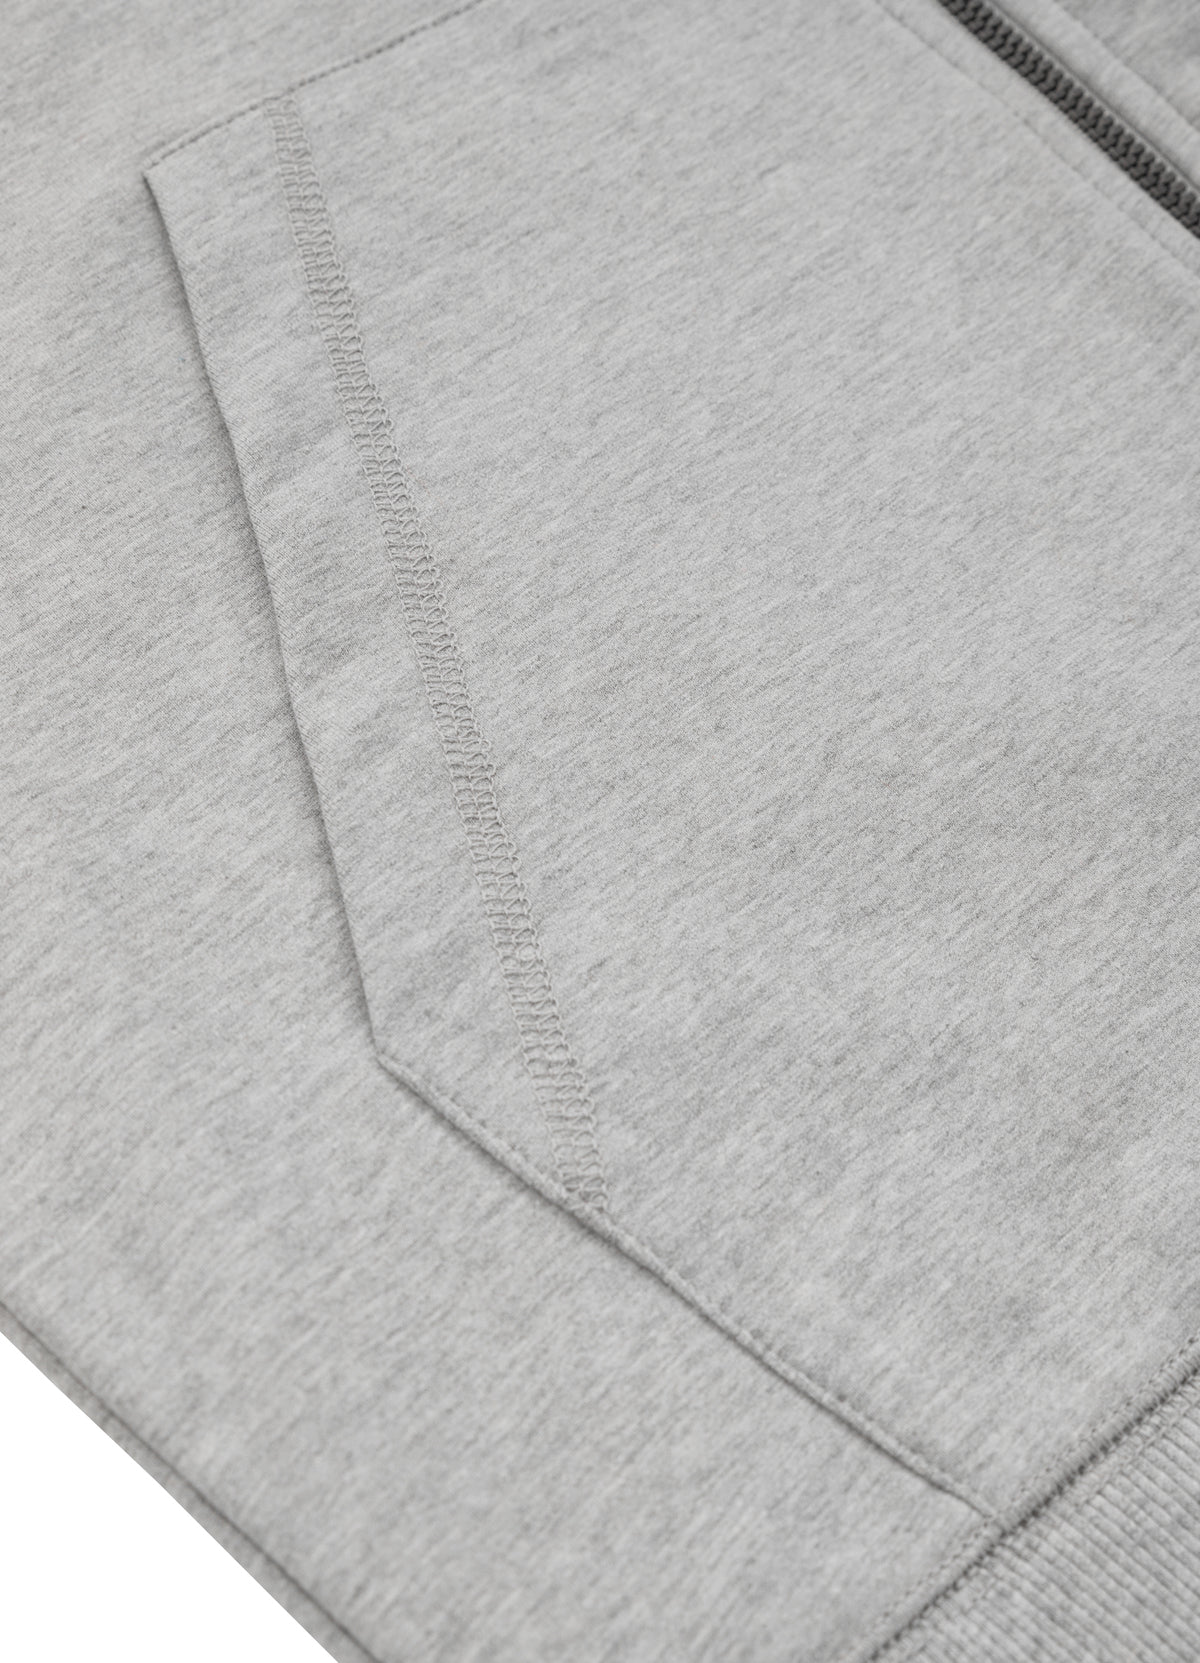 SMALL LOGO FRENCH TERRY 220 GREY ZIP UP HOODIE.